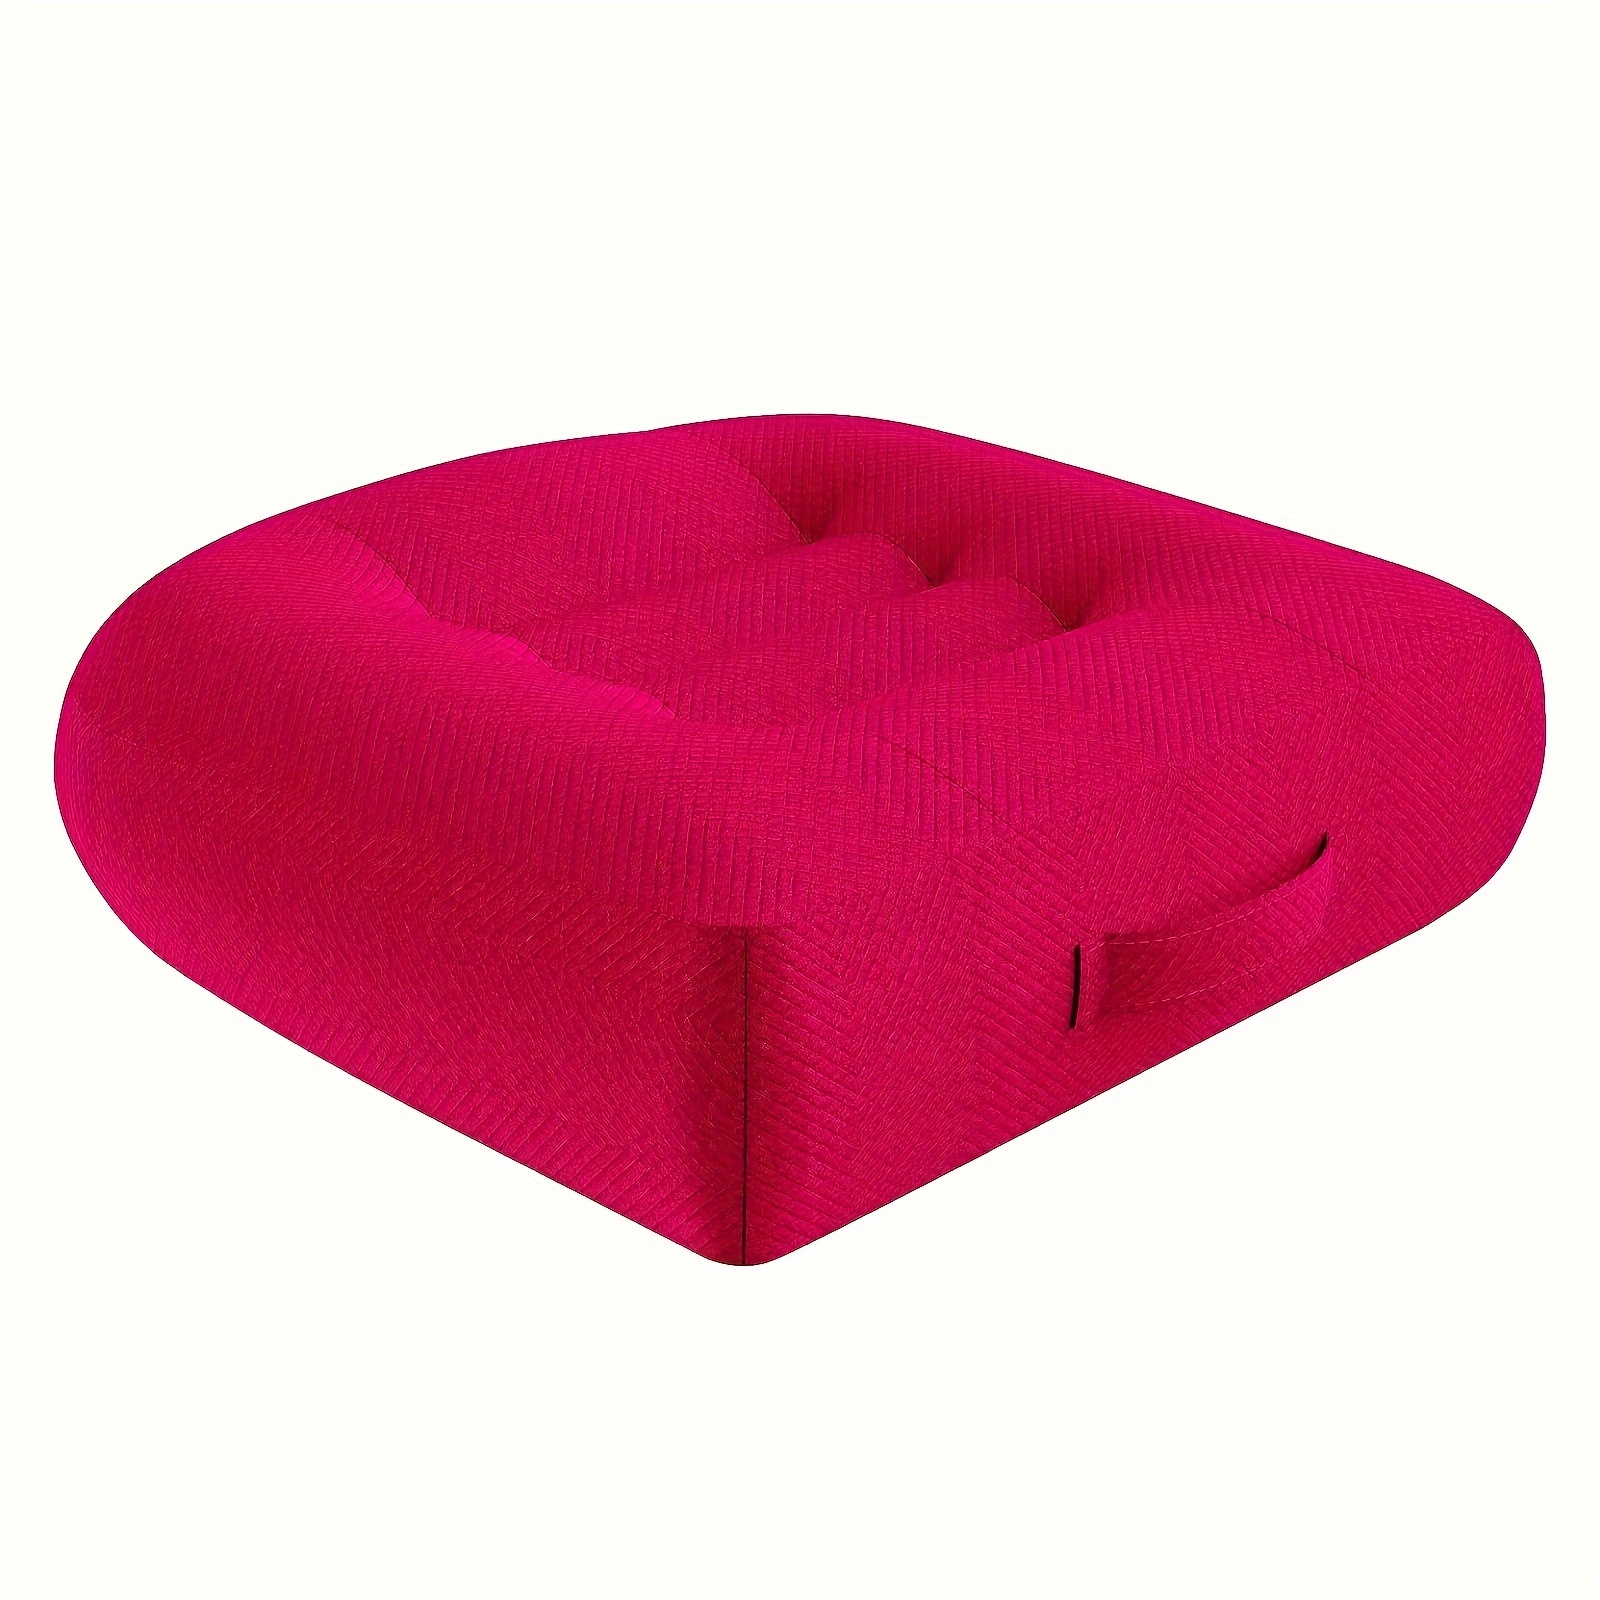  Seat Cushion Pillow for Office Chair/Car, Adult Car Booster  Cushions for Short People Increase Field of View, Support Chair Pad for  Butt, Tailbone, Back, Coccyx for Computer, Desk Chair : Baby